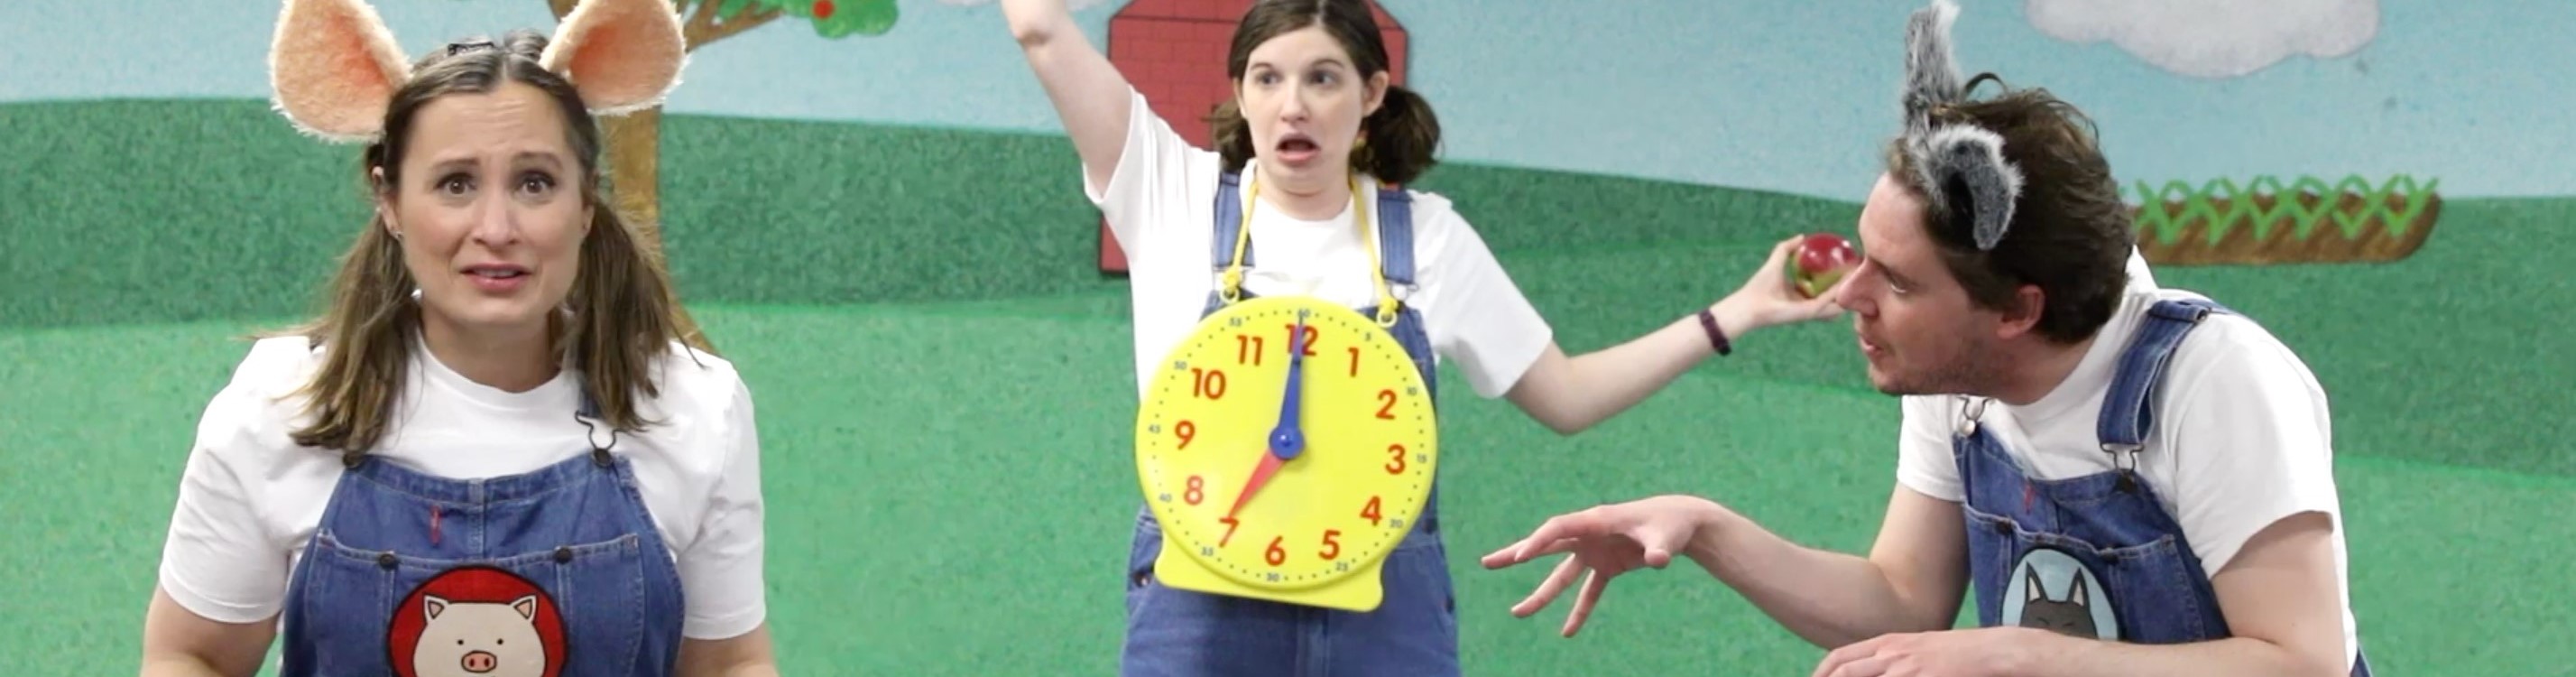 Image from First Stage's Theater Education programming